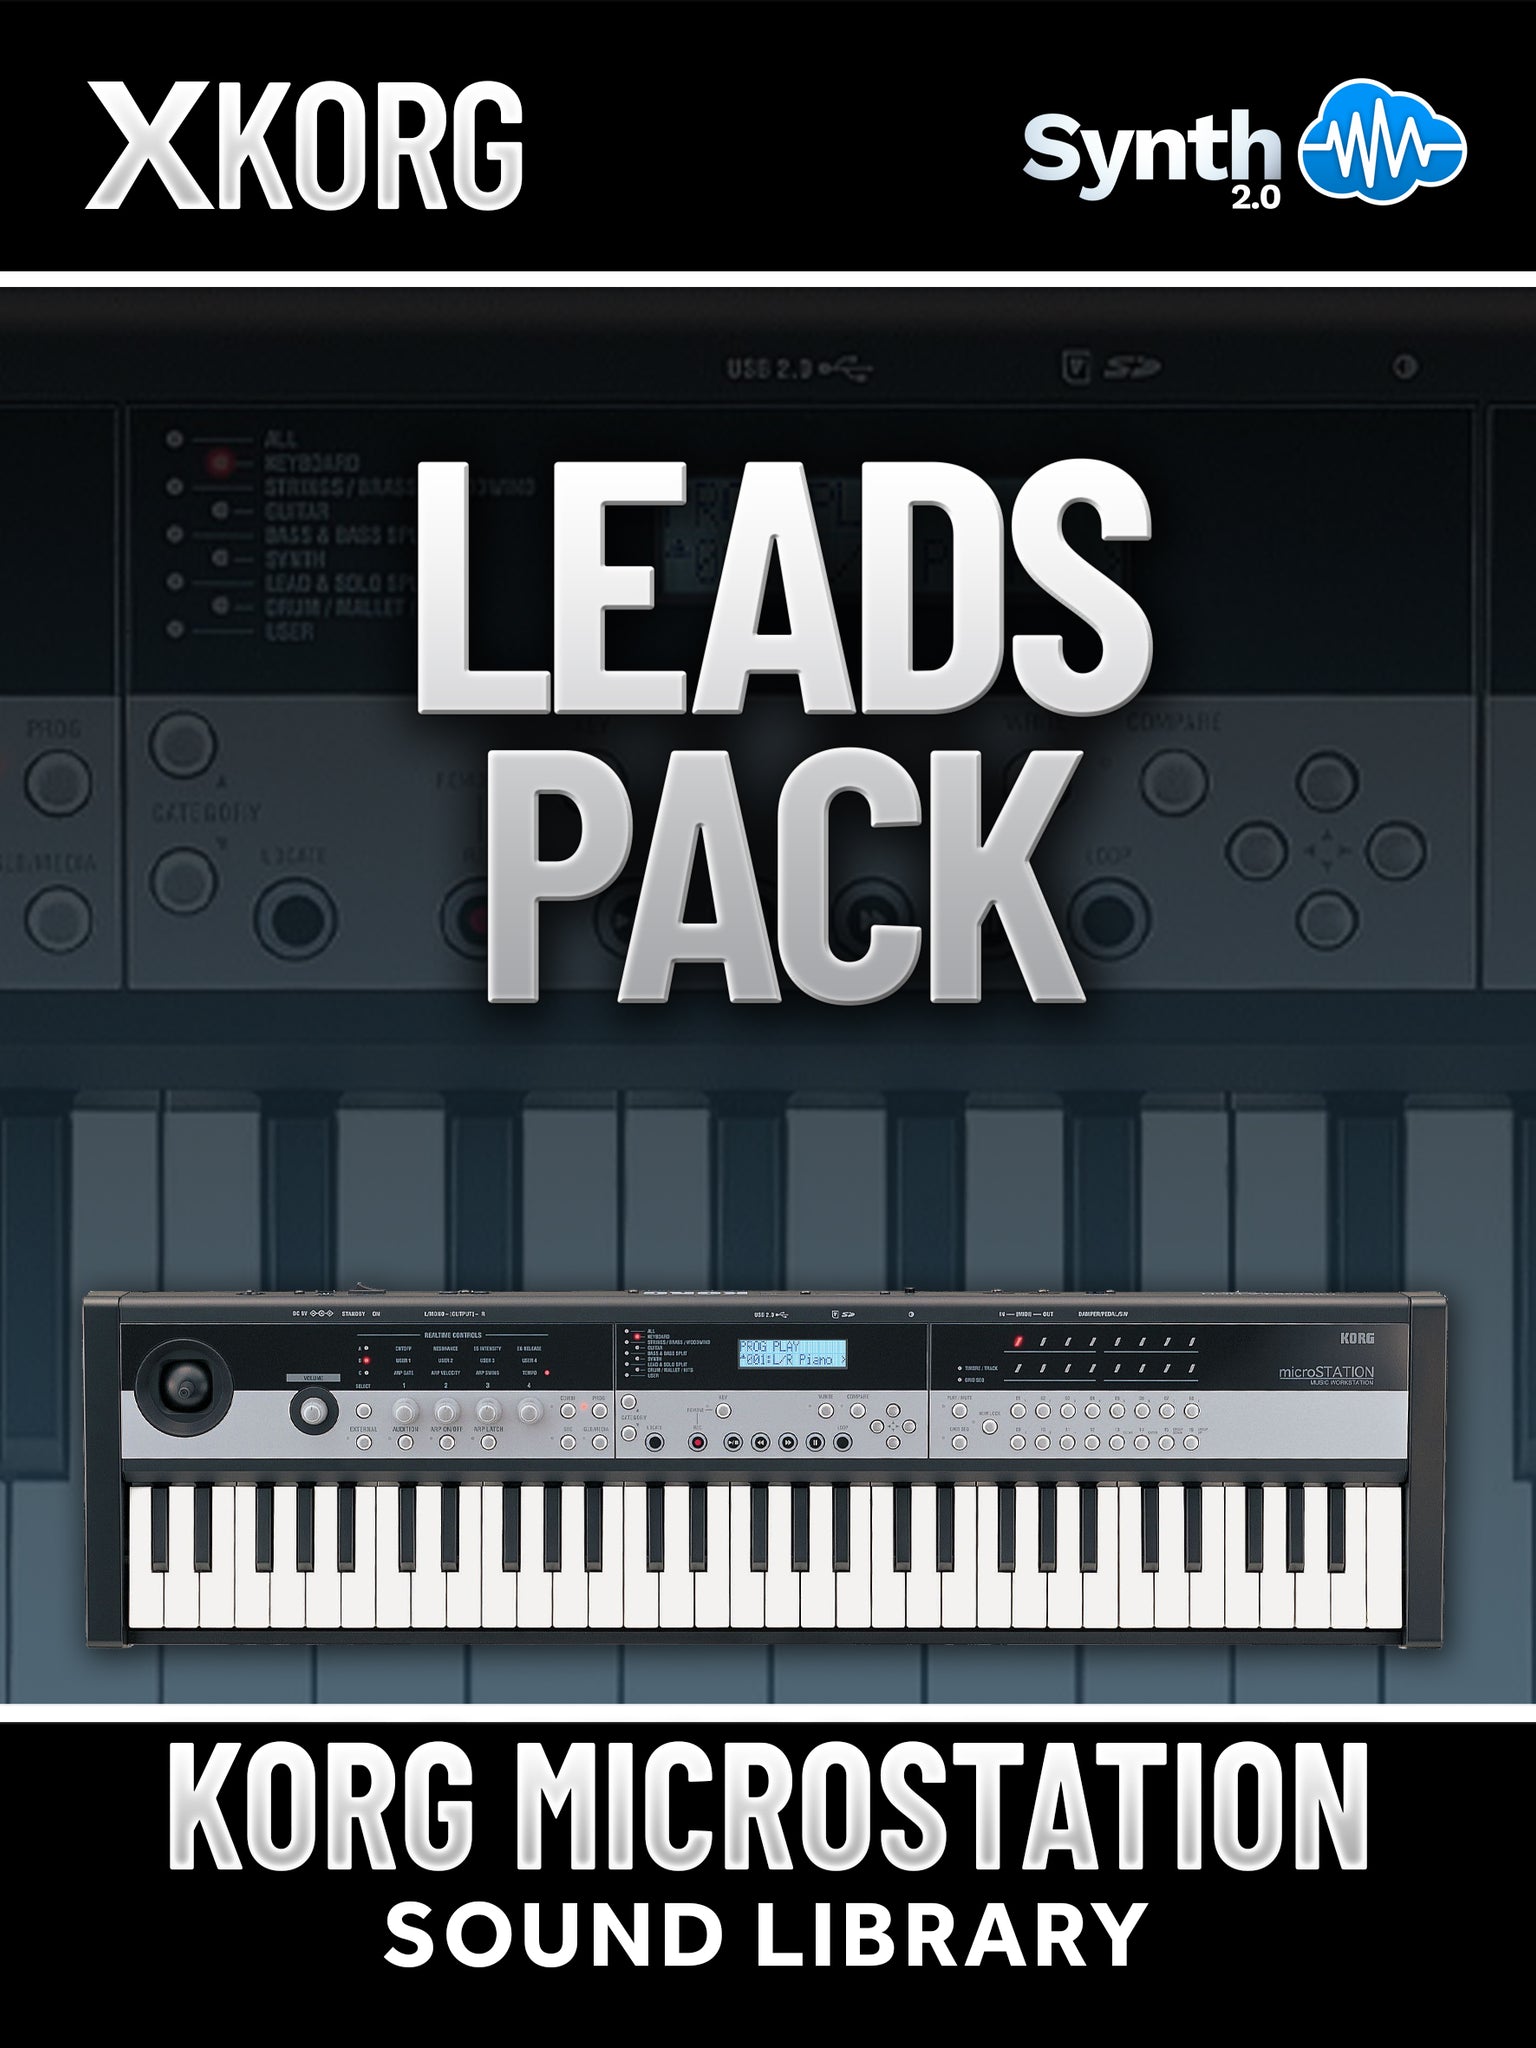 LDX015 - Leads Pack - Korg Microstation| Synthcloud